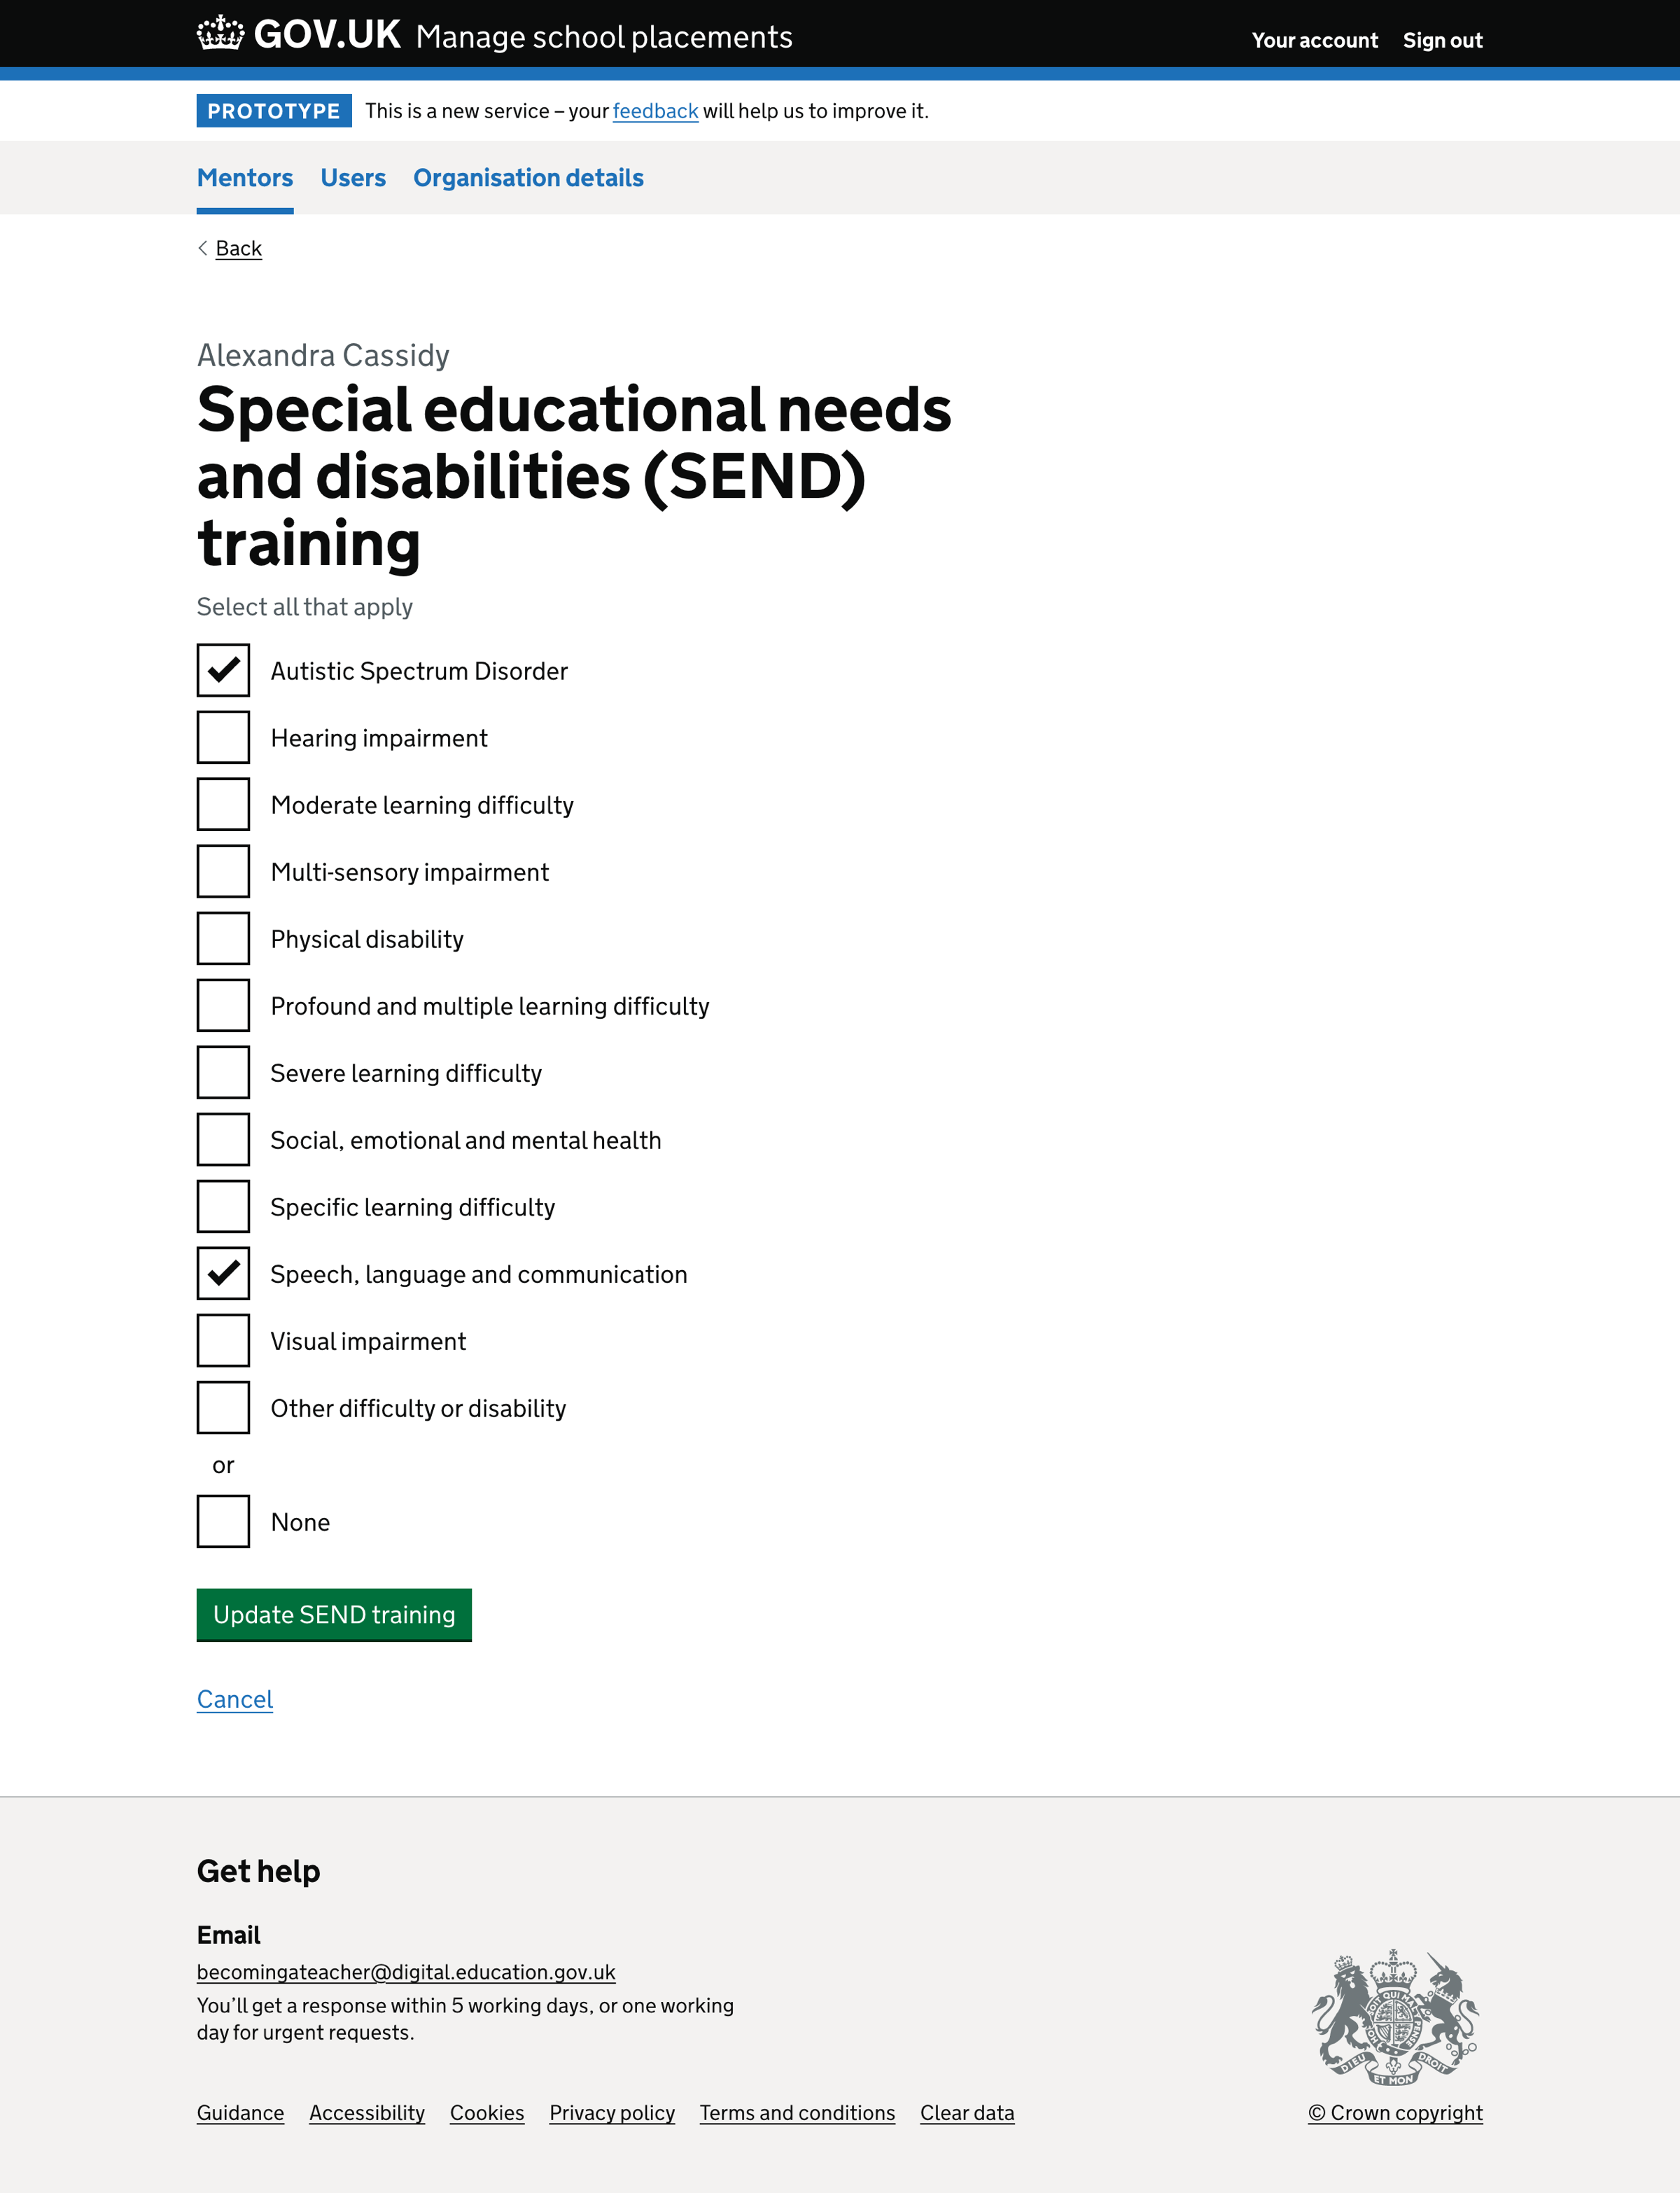 Image showing the mentor special educational needs and disabilities training question